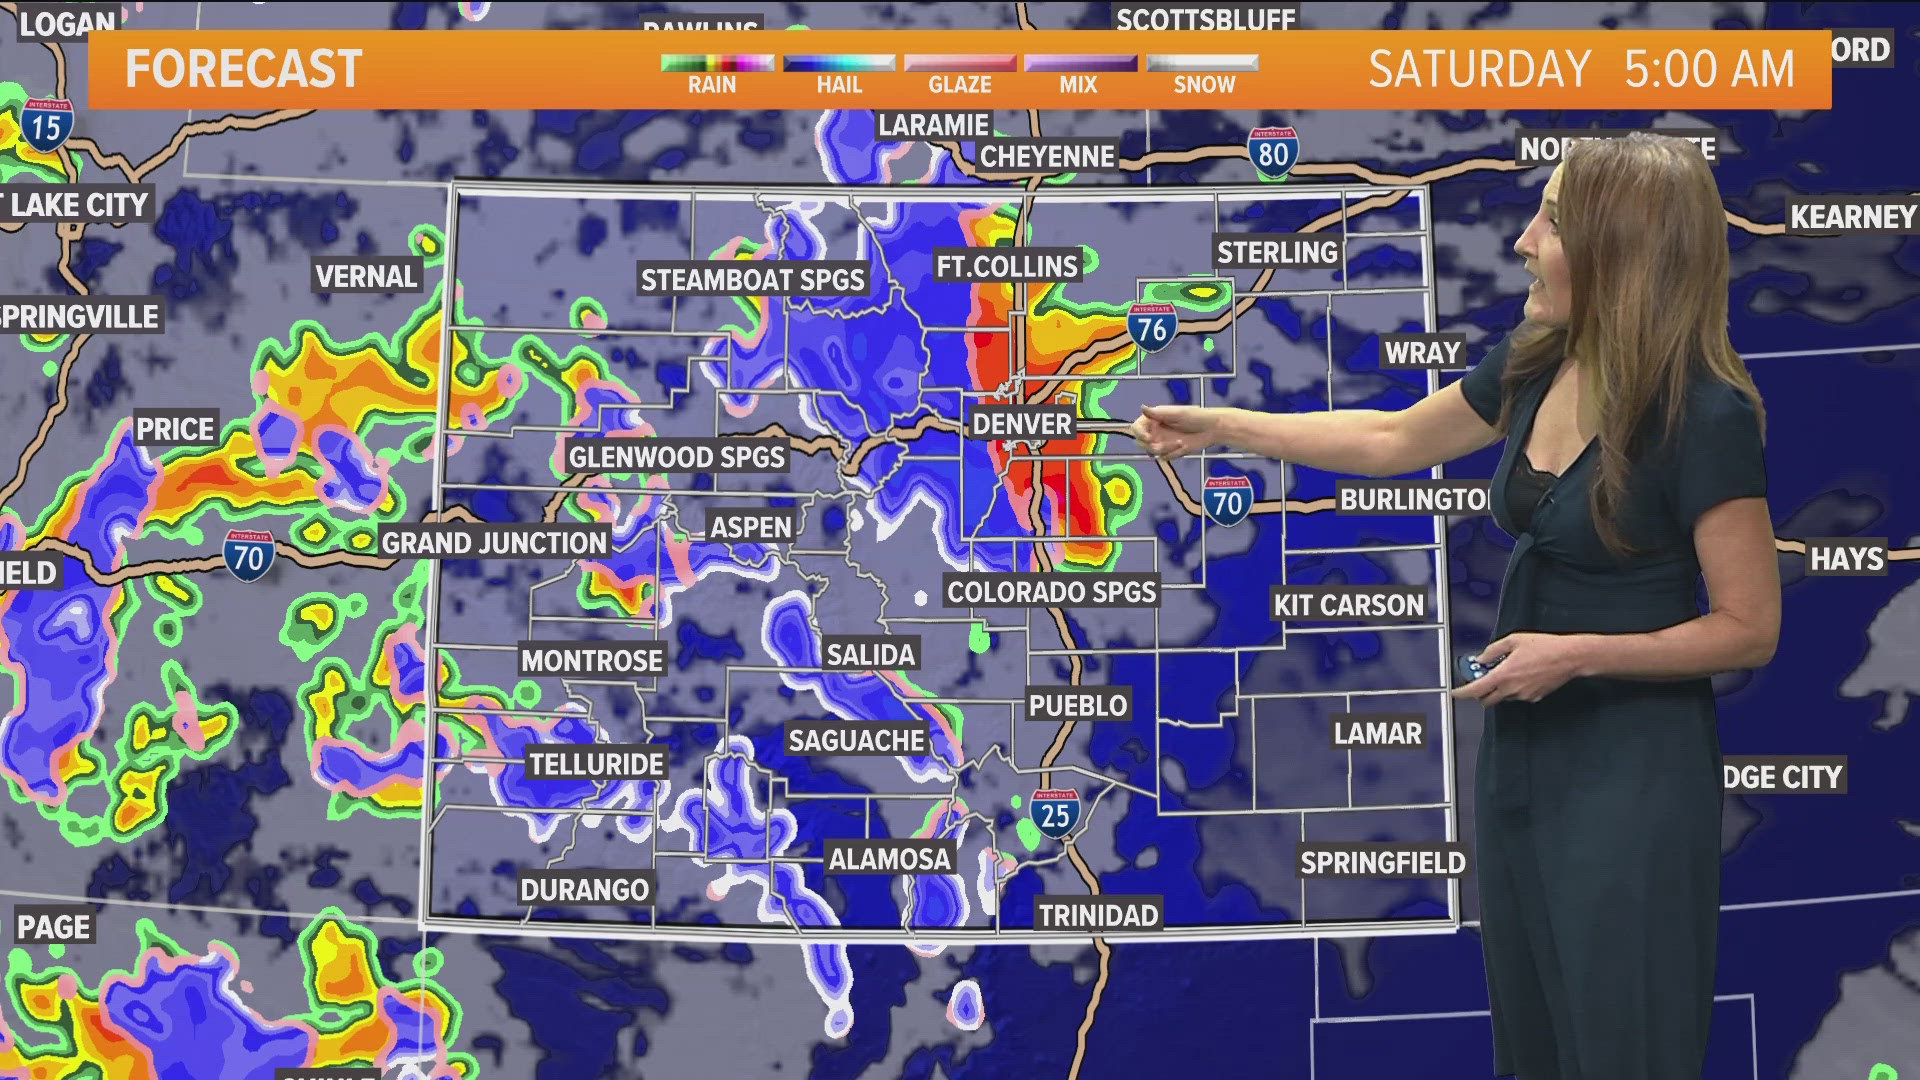 Colorado saw a tornado, rain and lightning on Thursday. More showers for the lower elevations and snow for the mountains is possible this weekend.